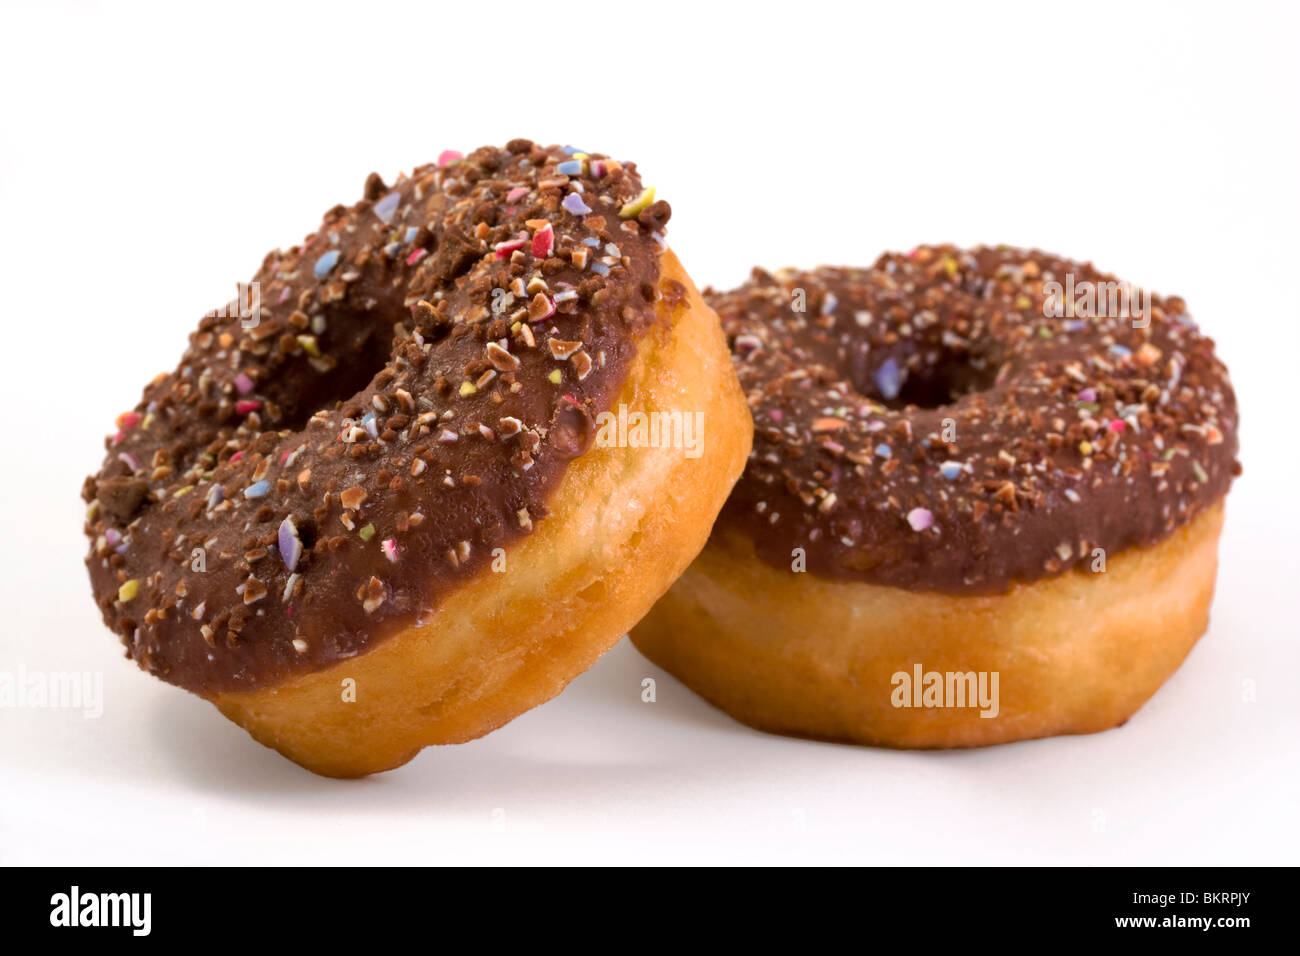 two chocolate covered doughnuts over white Stock Photo